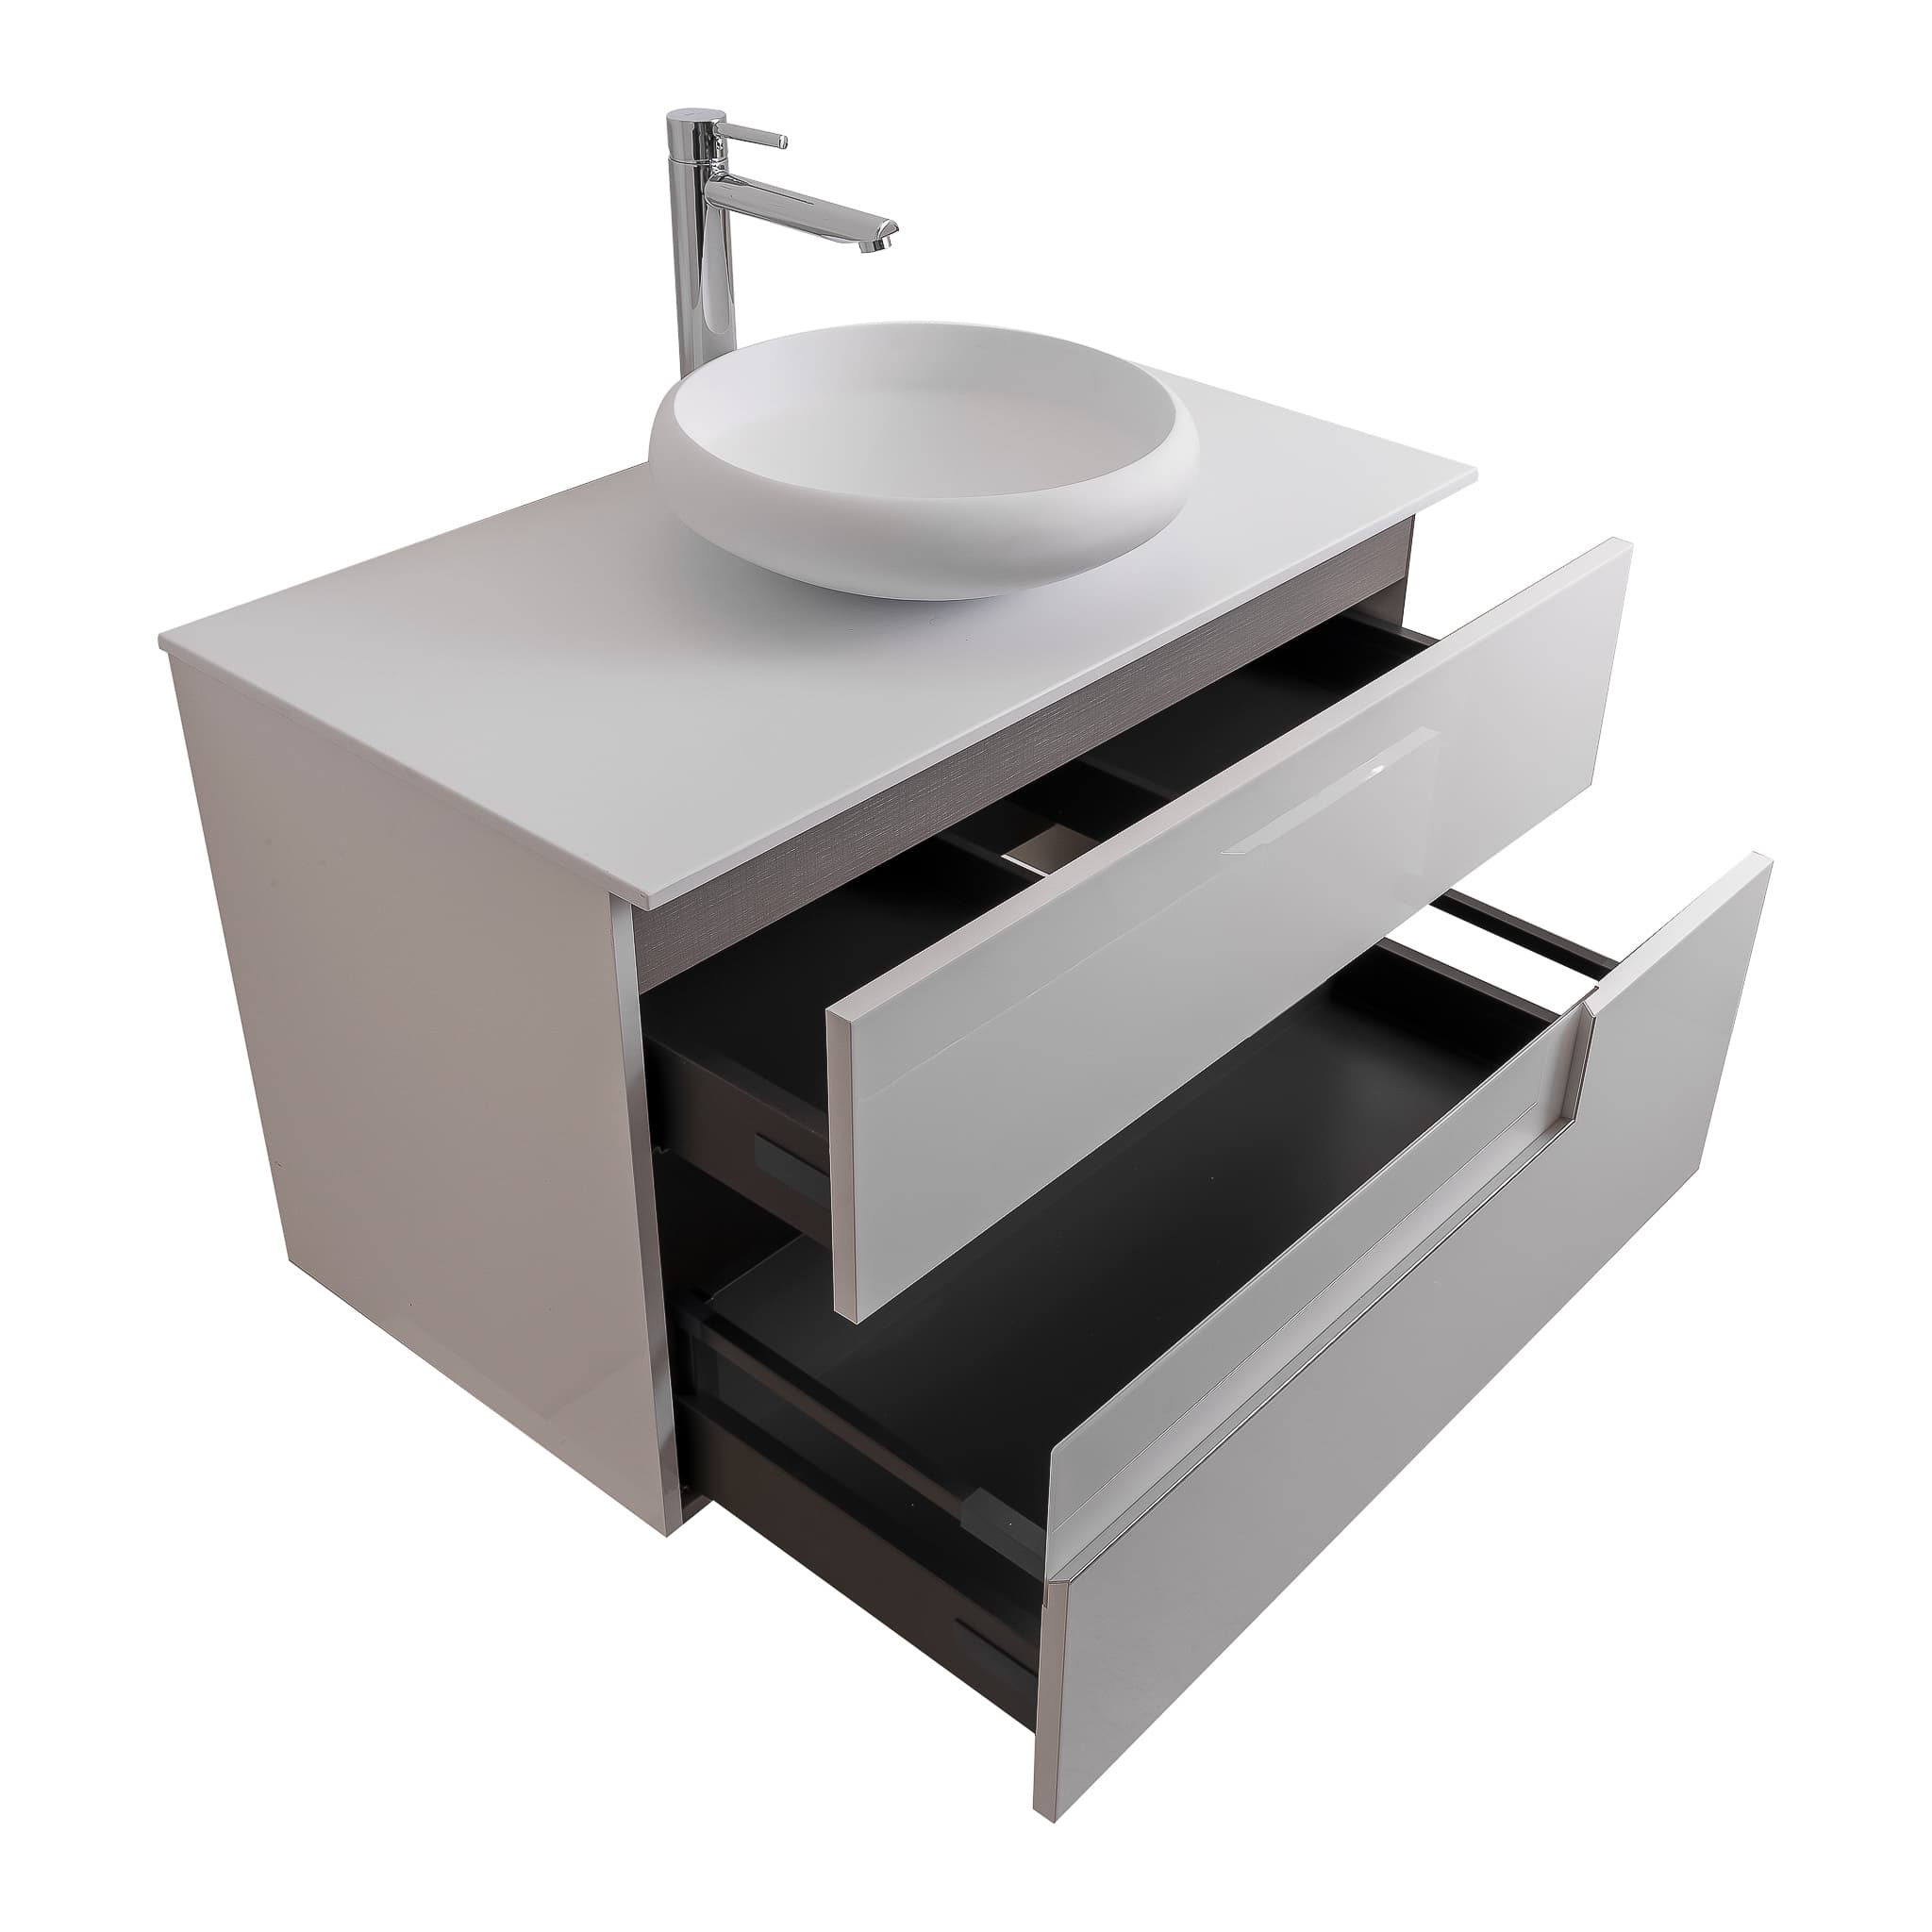 Vision 35.5 White High Gloss Cabinet, Solid Surface Flat White Counter And Round Solid Surface White Basin 1153, Wall Mounted Modern Vanity Set